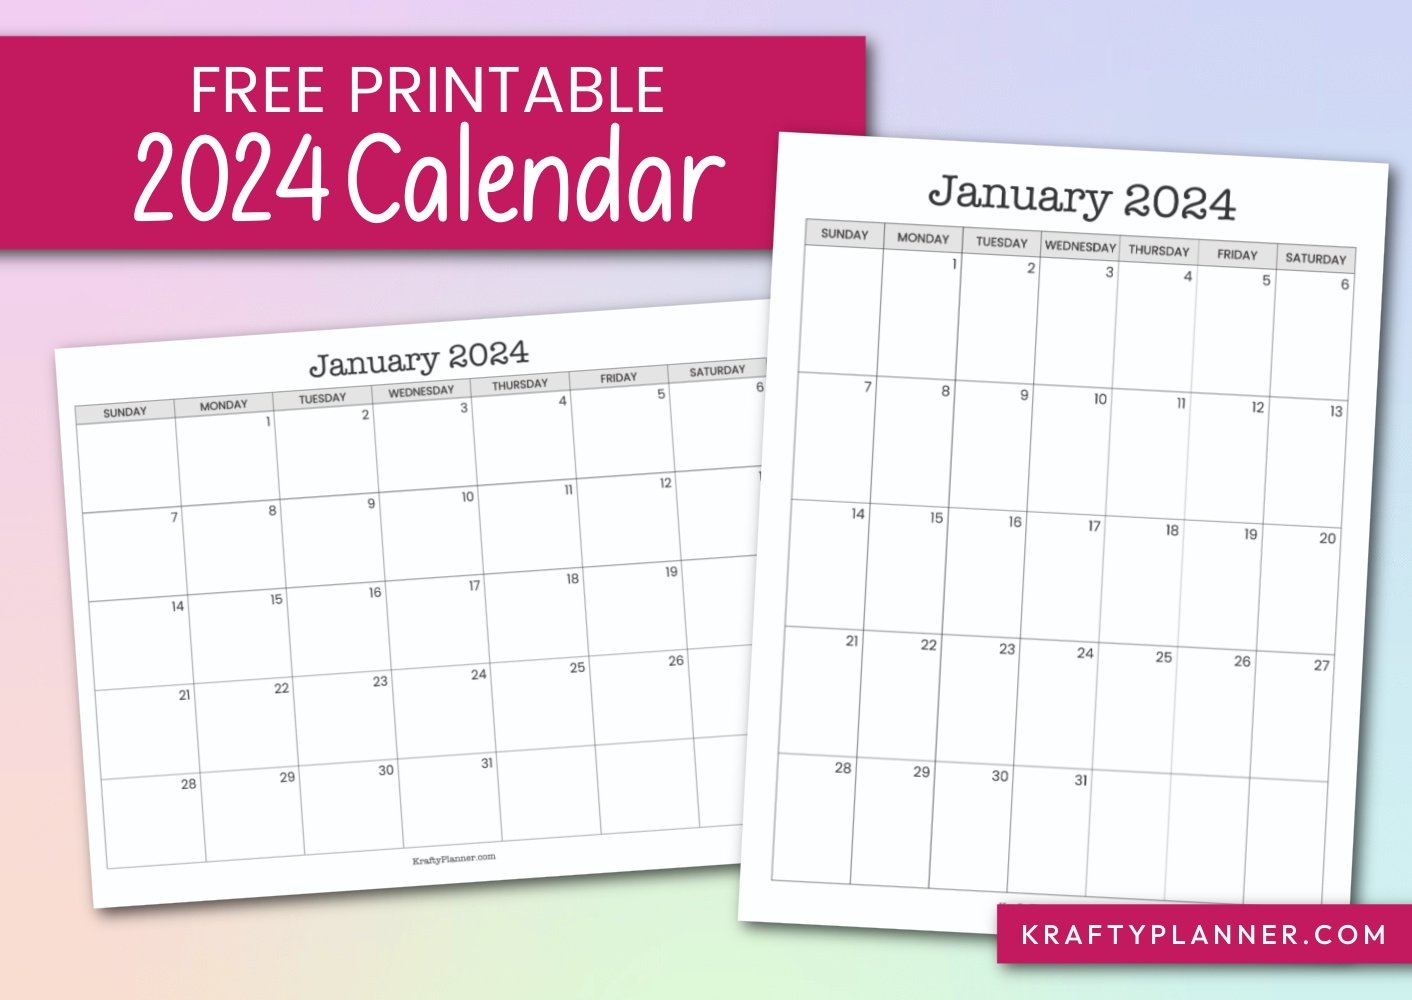 Free Printable 2024 Calendar With Notes And Task List — Krafty Planner throughout Free Printable Calendar 2024 With Room For Notes